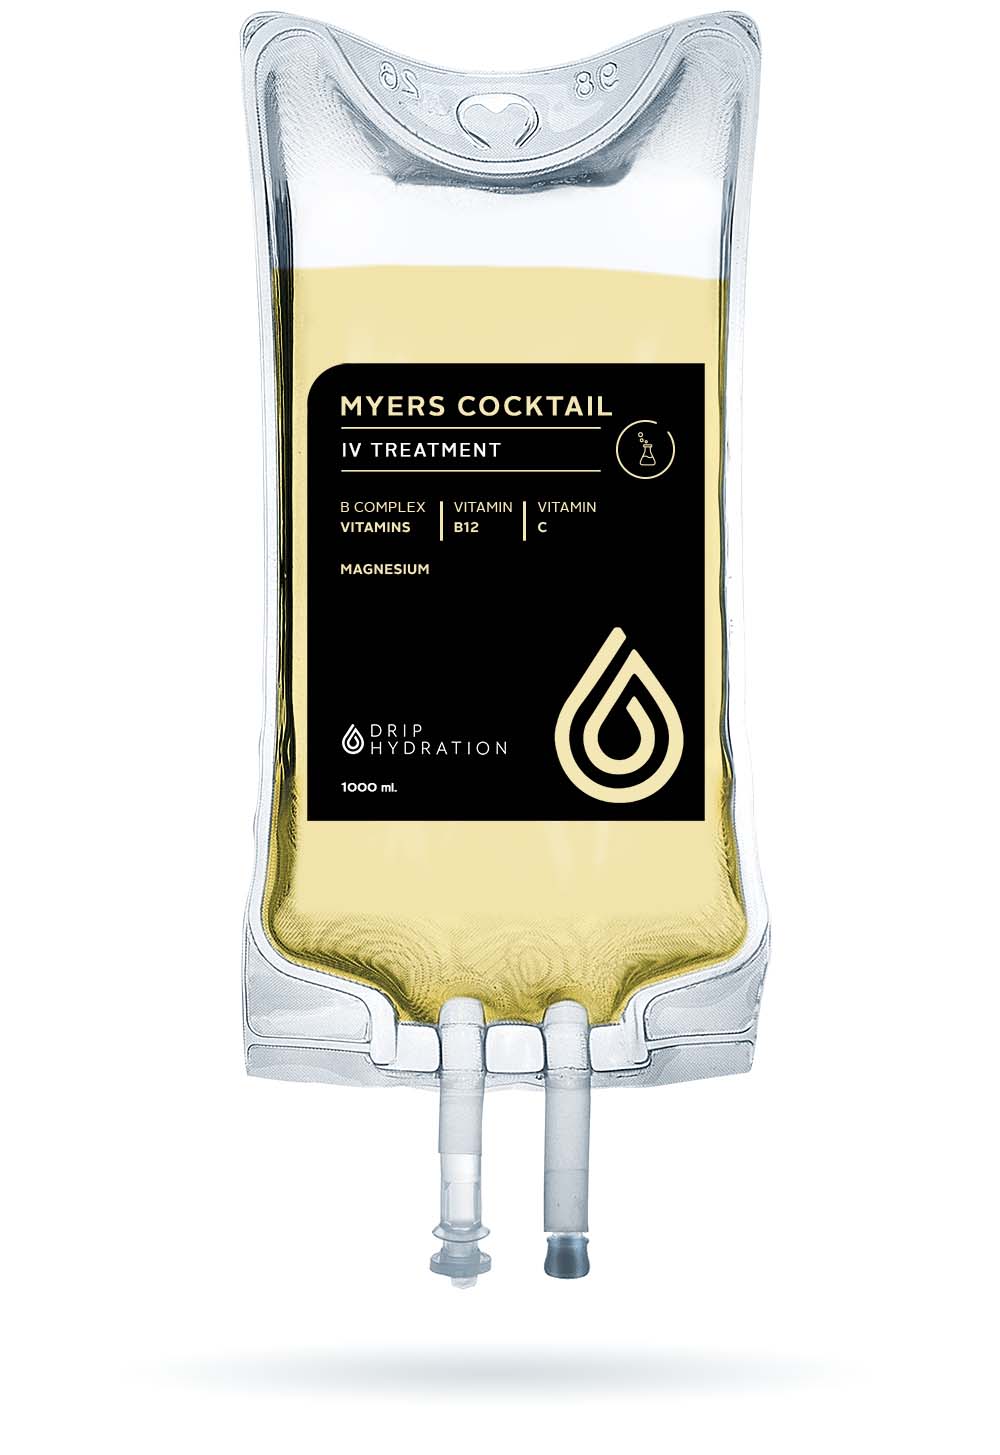 infusion bag named Myers Cocktail linking toward the service page